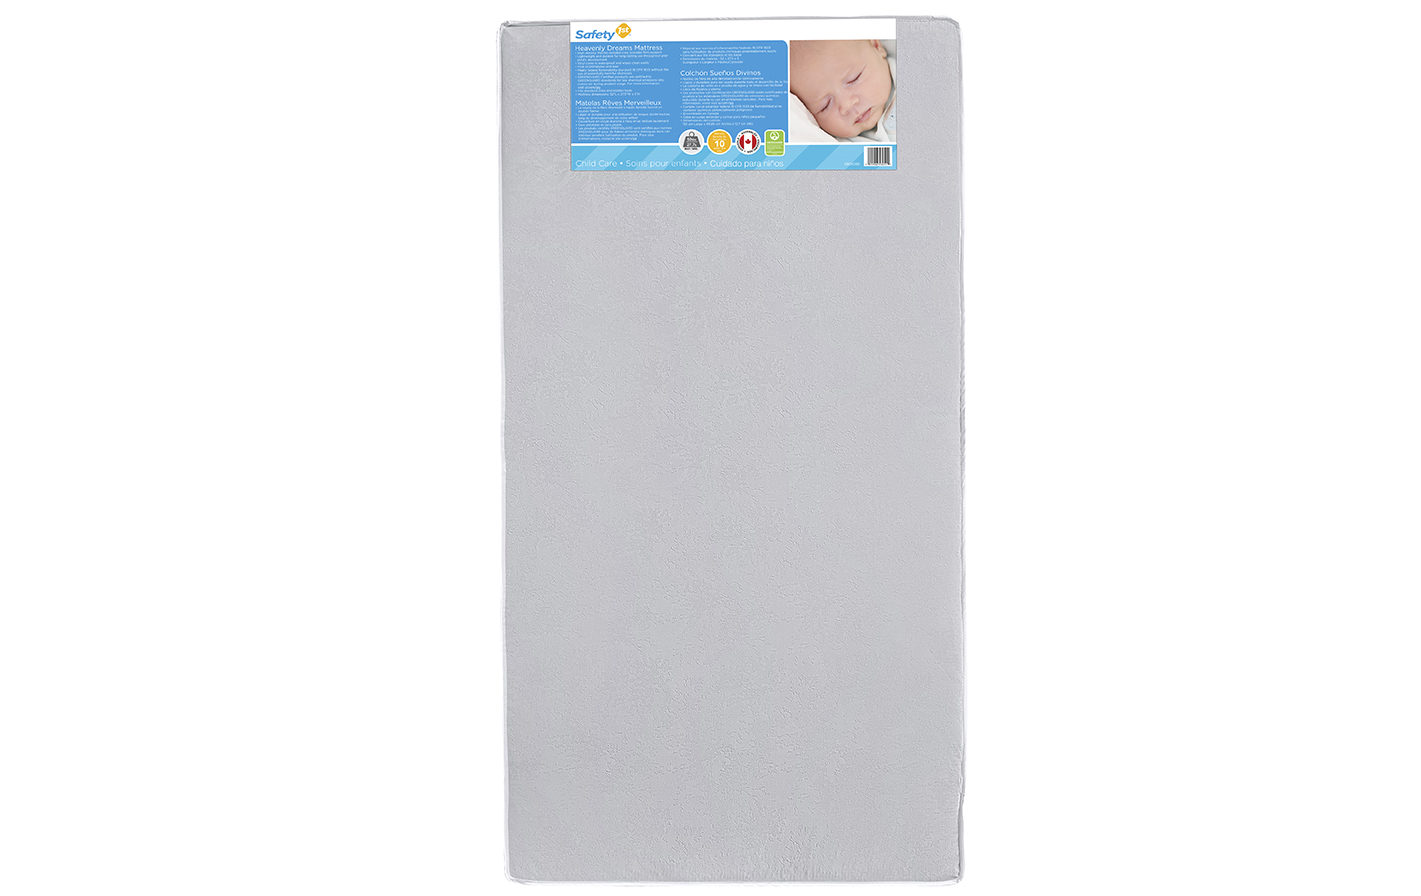  Safety 1st Heavenly Dreams Crib & Toddler Bed Mattress